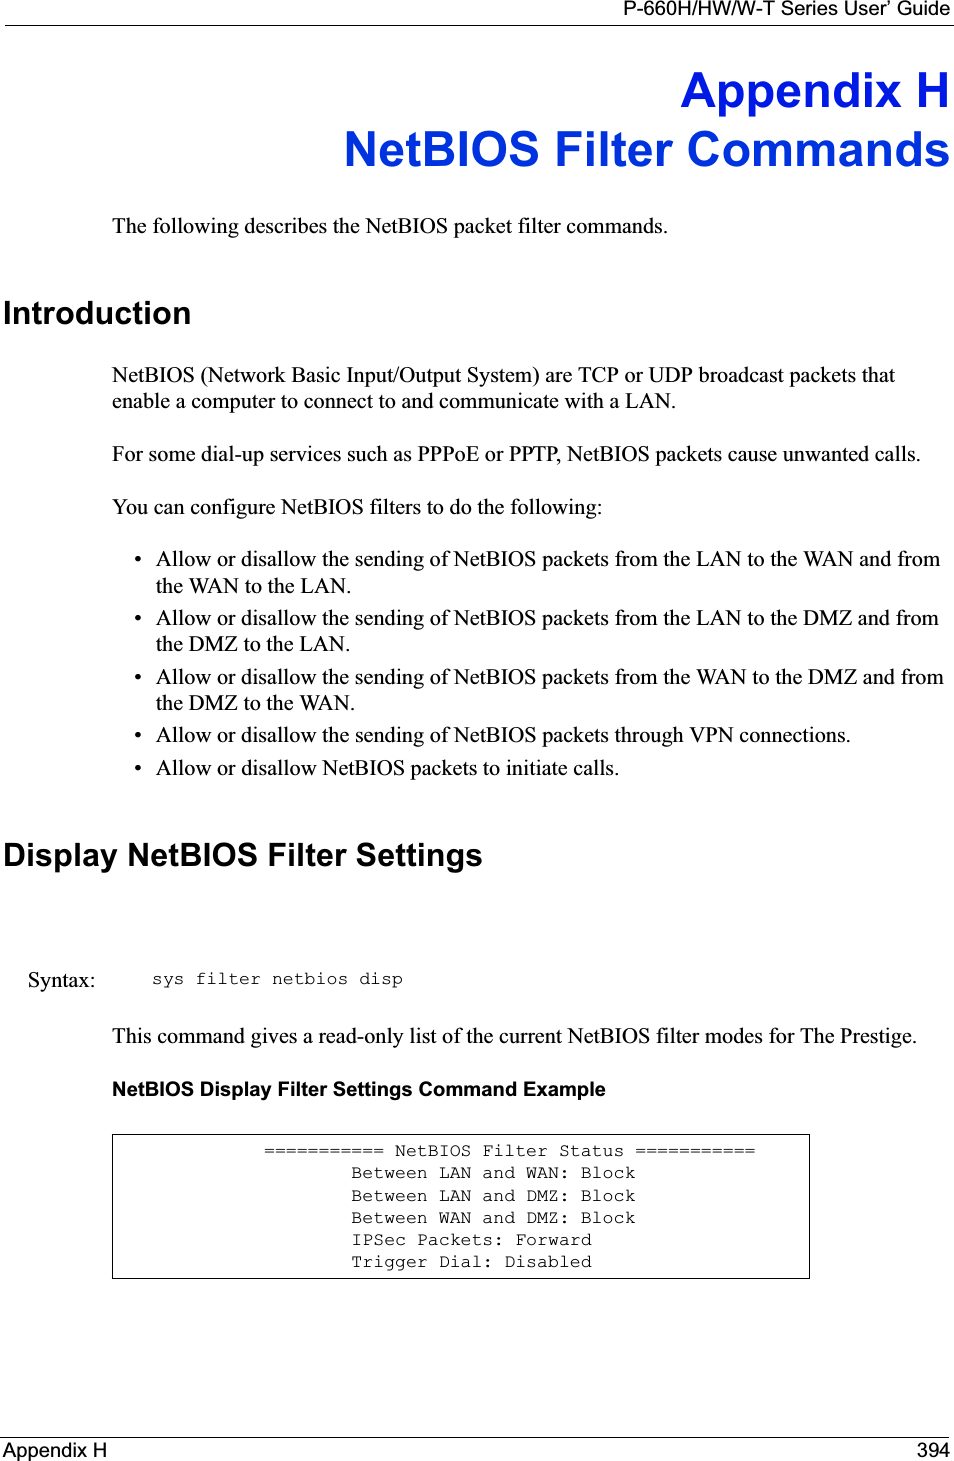 P-660H/HW/W-T Series User’ GuideAppendix H 394Appendix HNetBIOS Filter CommandsThe following describes the NetBIOS packet filter commands.IntroductionNetBIOS (Network Basic Input/Output System) are TCP or UDP broadcast packets that enable a computer to connect to and communicate with a LAN. For some dial-up services such as PPPoE or PPTP, NetBIOS packets cause unwanted calls.You can configure NetBIOS filters to do the following:• Allow or disallow the sending of NetBIOS packets from the LAN to the WAN and from the WAN to the LAN.• Allow or disallow the sending of NetBIOS packets from the LAN to the DMZ and from the DMZ to the LAN.• Allow or disallow the sending of NetBIOS packets from the WAN to the DMZ and from the DMZ to the WAN.• Allow or disallow the sending of NetBIOS packets through VPN connections.• Allow or disallow NetBIOS packets to initiate calls.Display NetBIOS Filter SettingsThis command gives a read-only list of the current NetBIOS filter modes for The Prestige.NetBIOS Display Filter Settings Command ExampleSyntax: sys filter netbios disp=========== NetBIOS Filter Status ===========        Between LAN and WAN: Block        Between LAN and DMZ: Block        Between WAN and DMZ: Block        IPSec Packets: Forward        Trigger Dial: Disabled